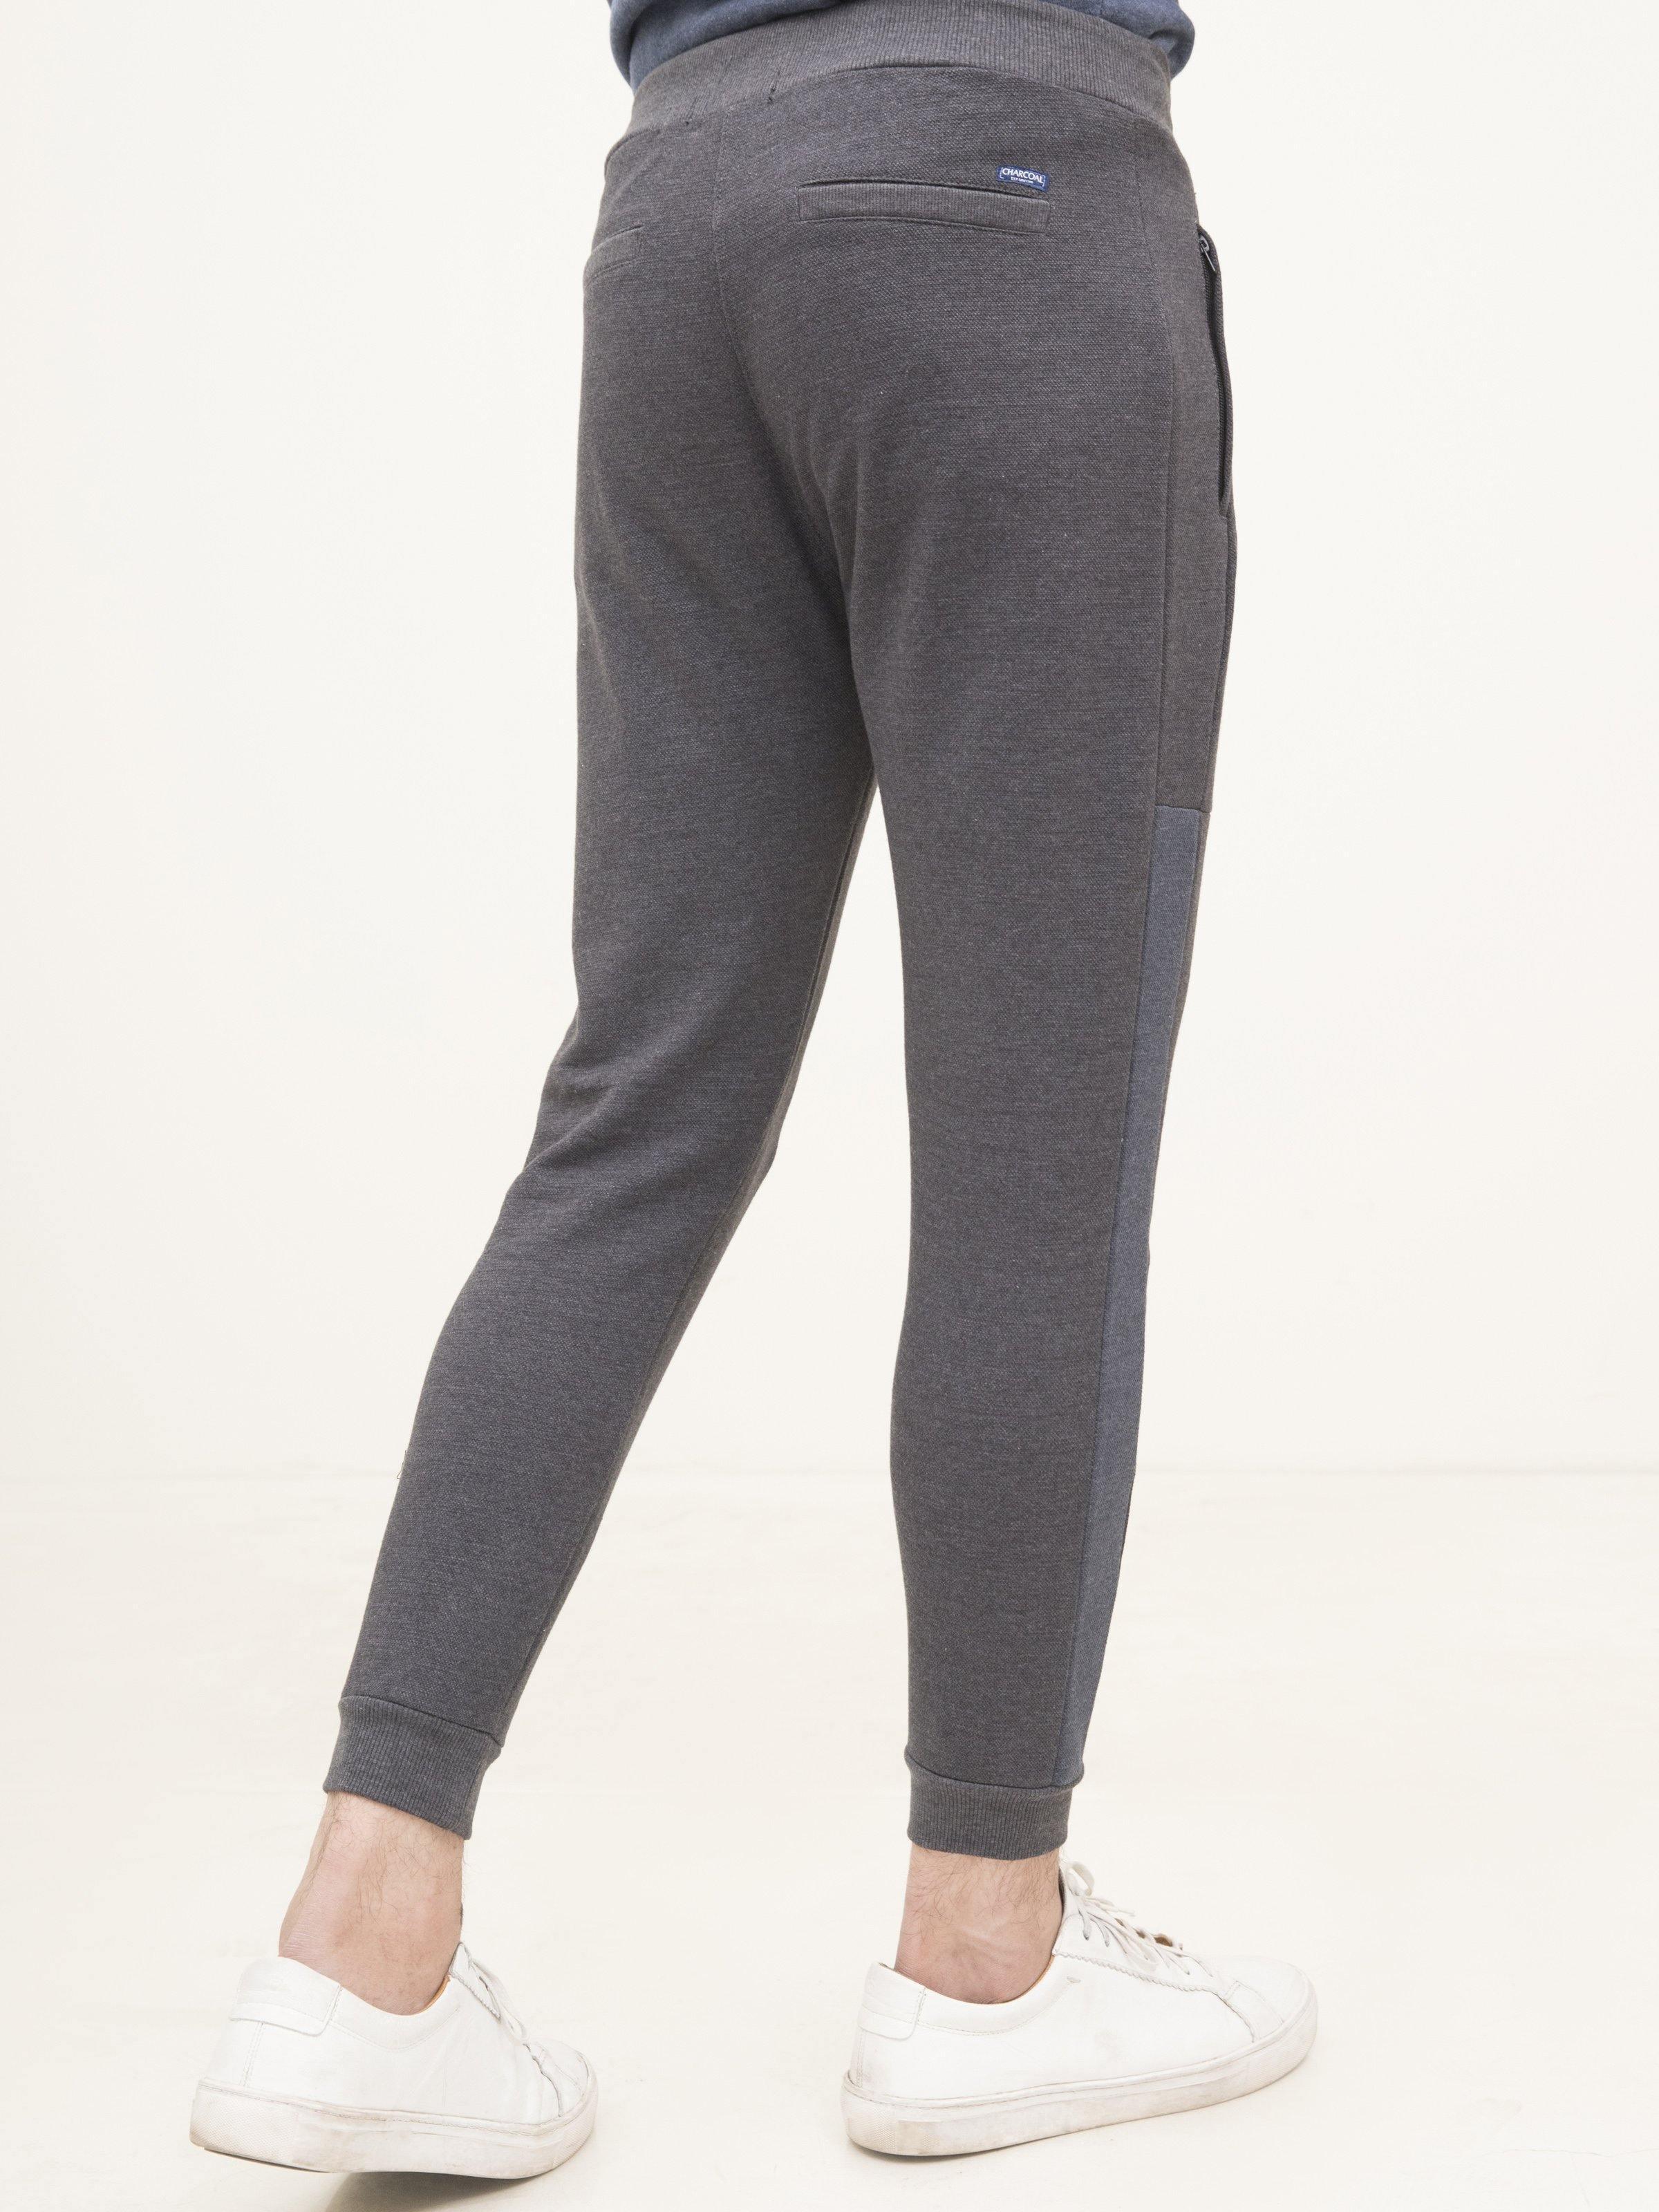 PIQUE FLEECE TROUSER DARK CHARCOAL at Charcoal Clothing